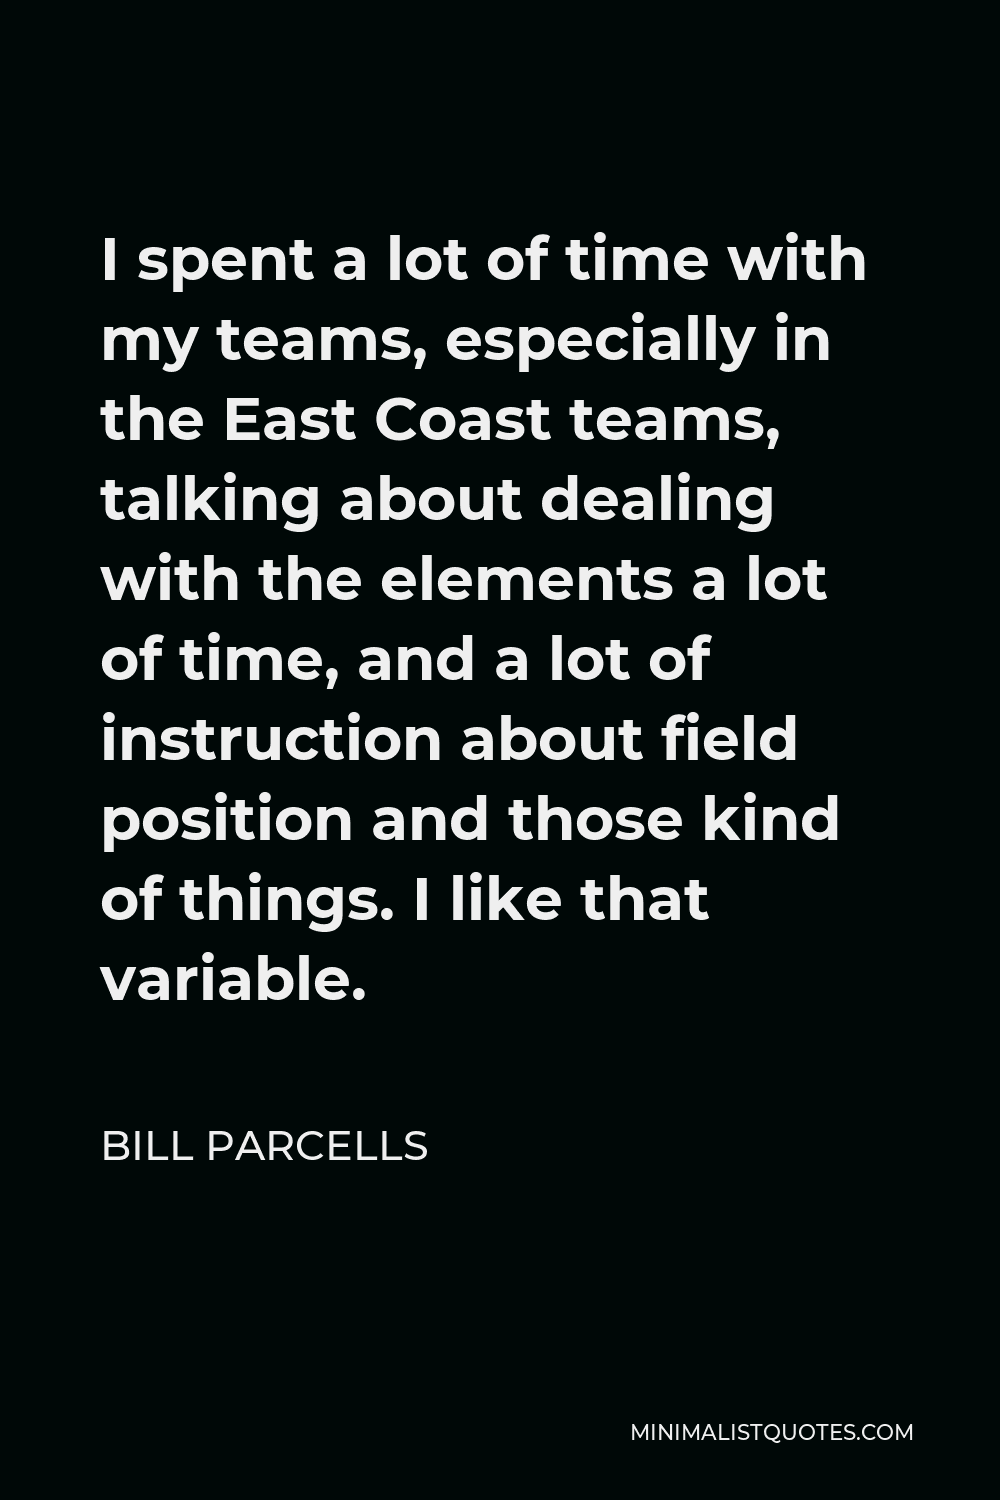 Bill Parcells Quote - I spent a lot of time with my teams, especially in the East Coast teams, talking about dealing with the elements a lot of time, and a lot of instruction about field position and those kind of things. I like that variable.